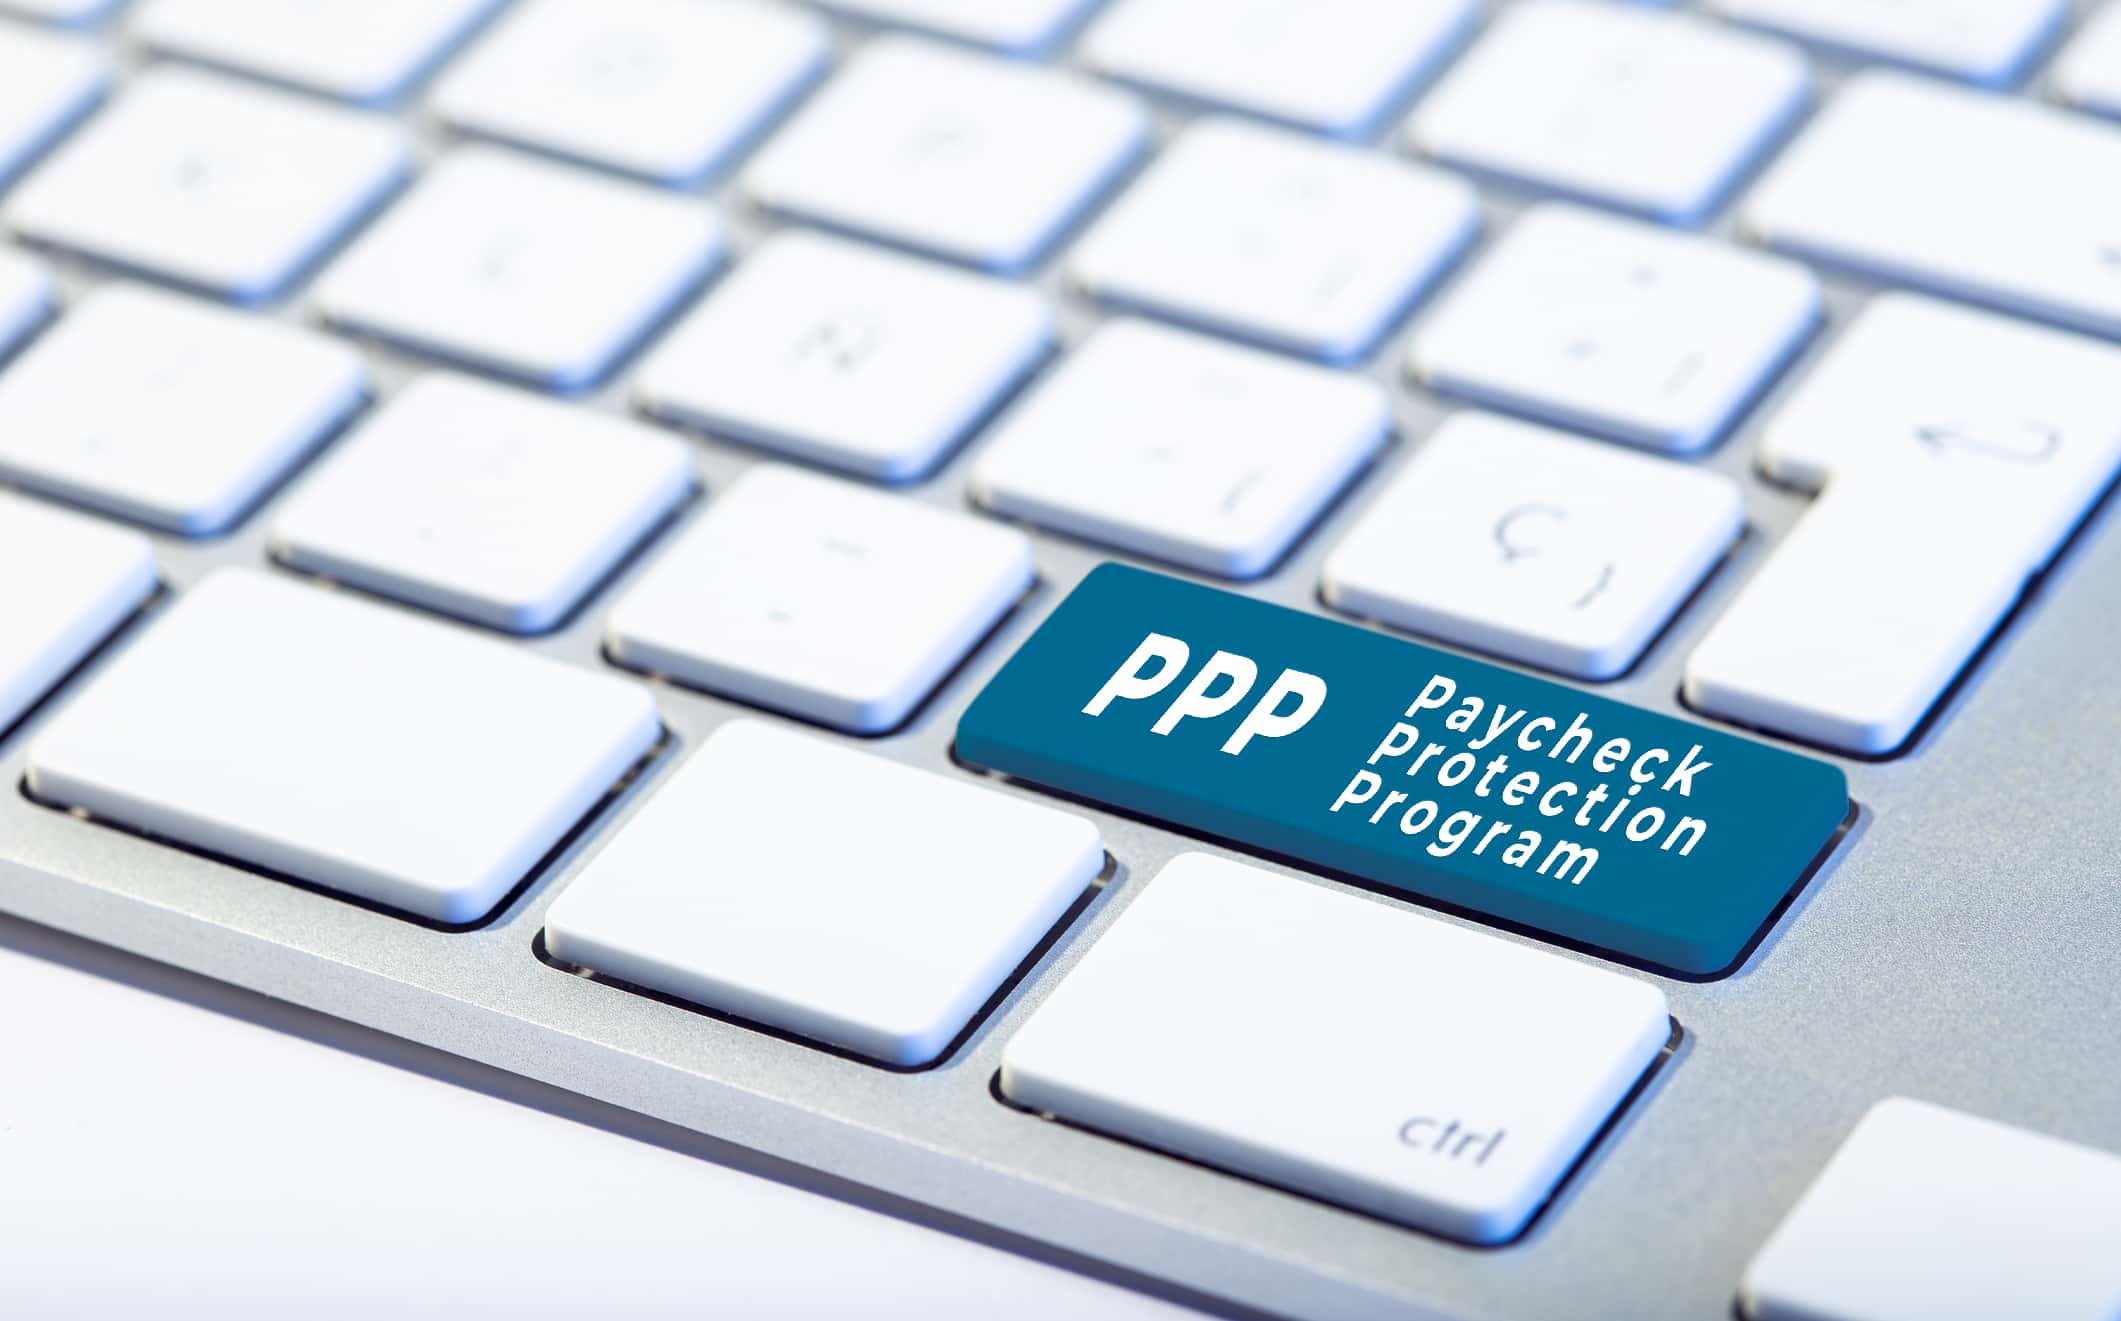 ppp-paycheck-protection-program-concept-inscription-on-keyboard-4